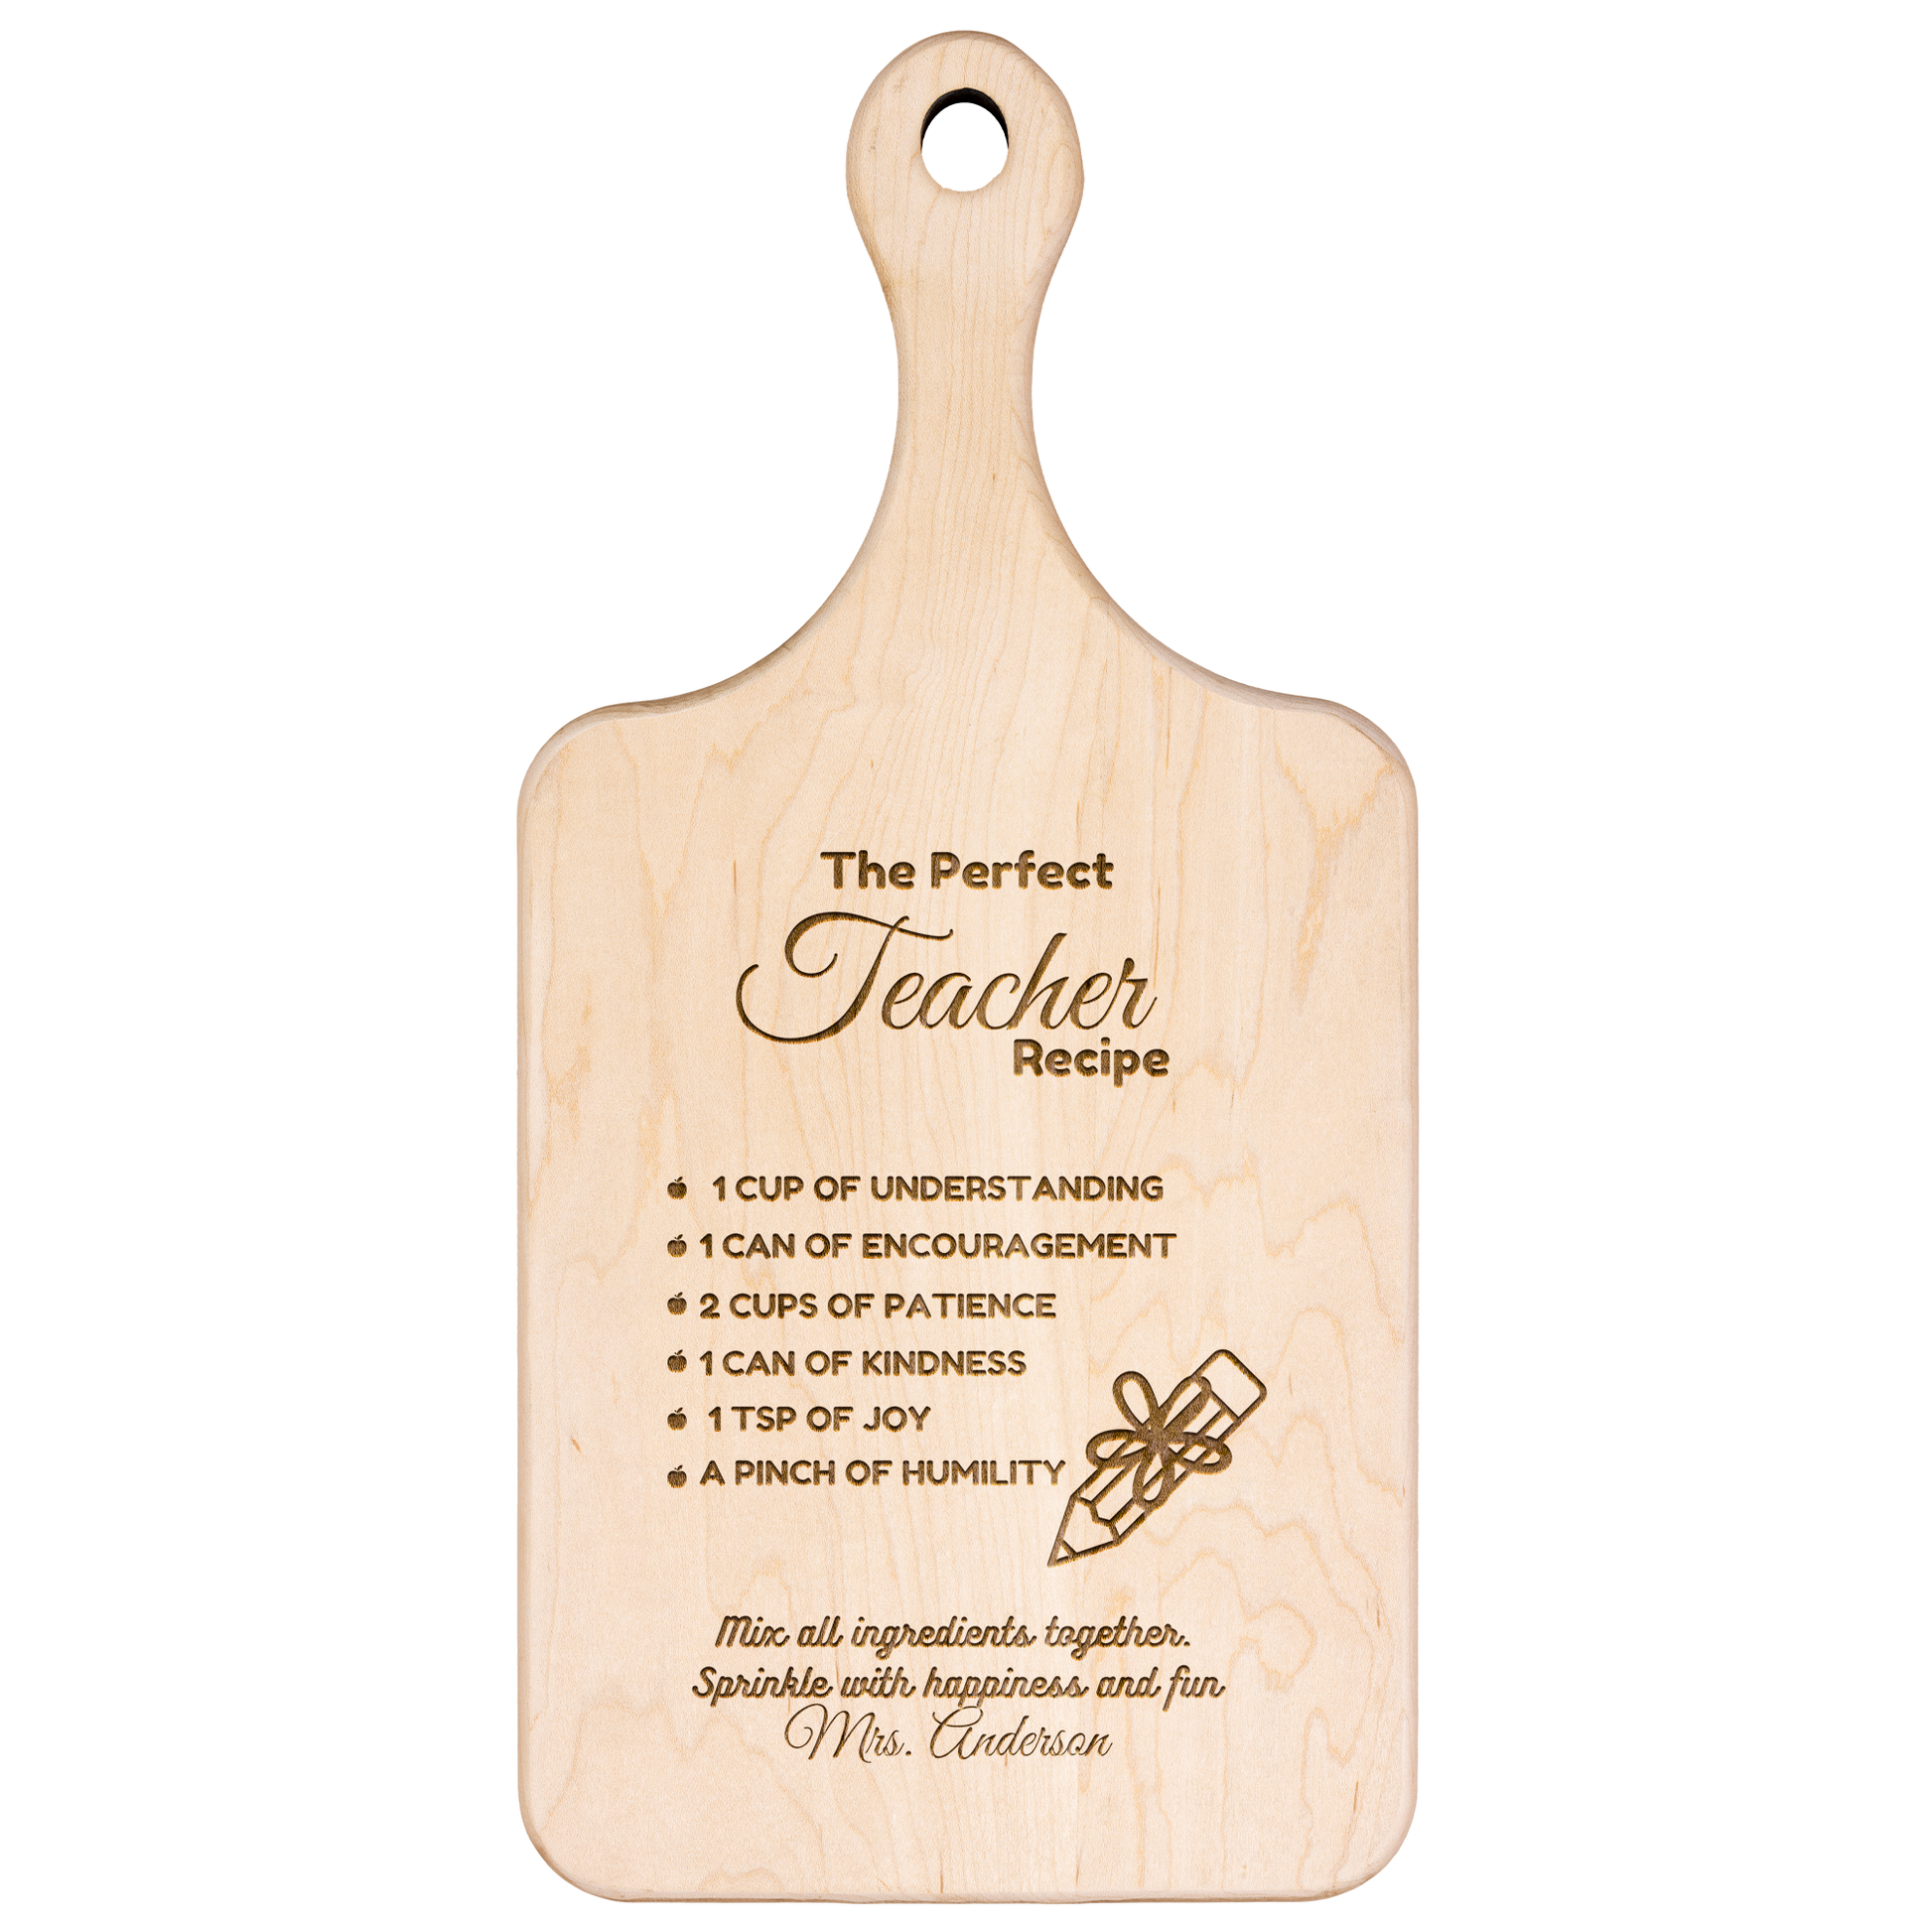 Get trendy with The Perfect Teacher Recipe Hardwood Paddle Cutting Board -  available at Good Gift Company. Grab yours for $22.50 today!